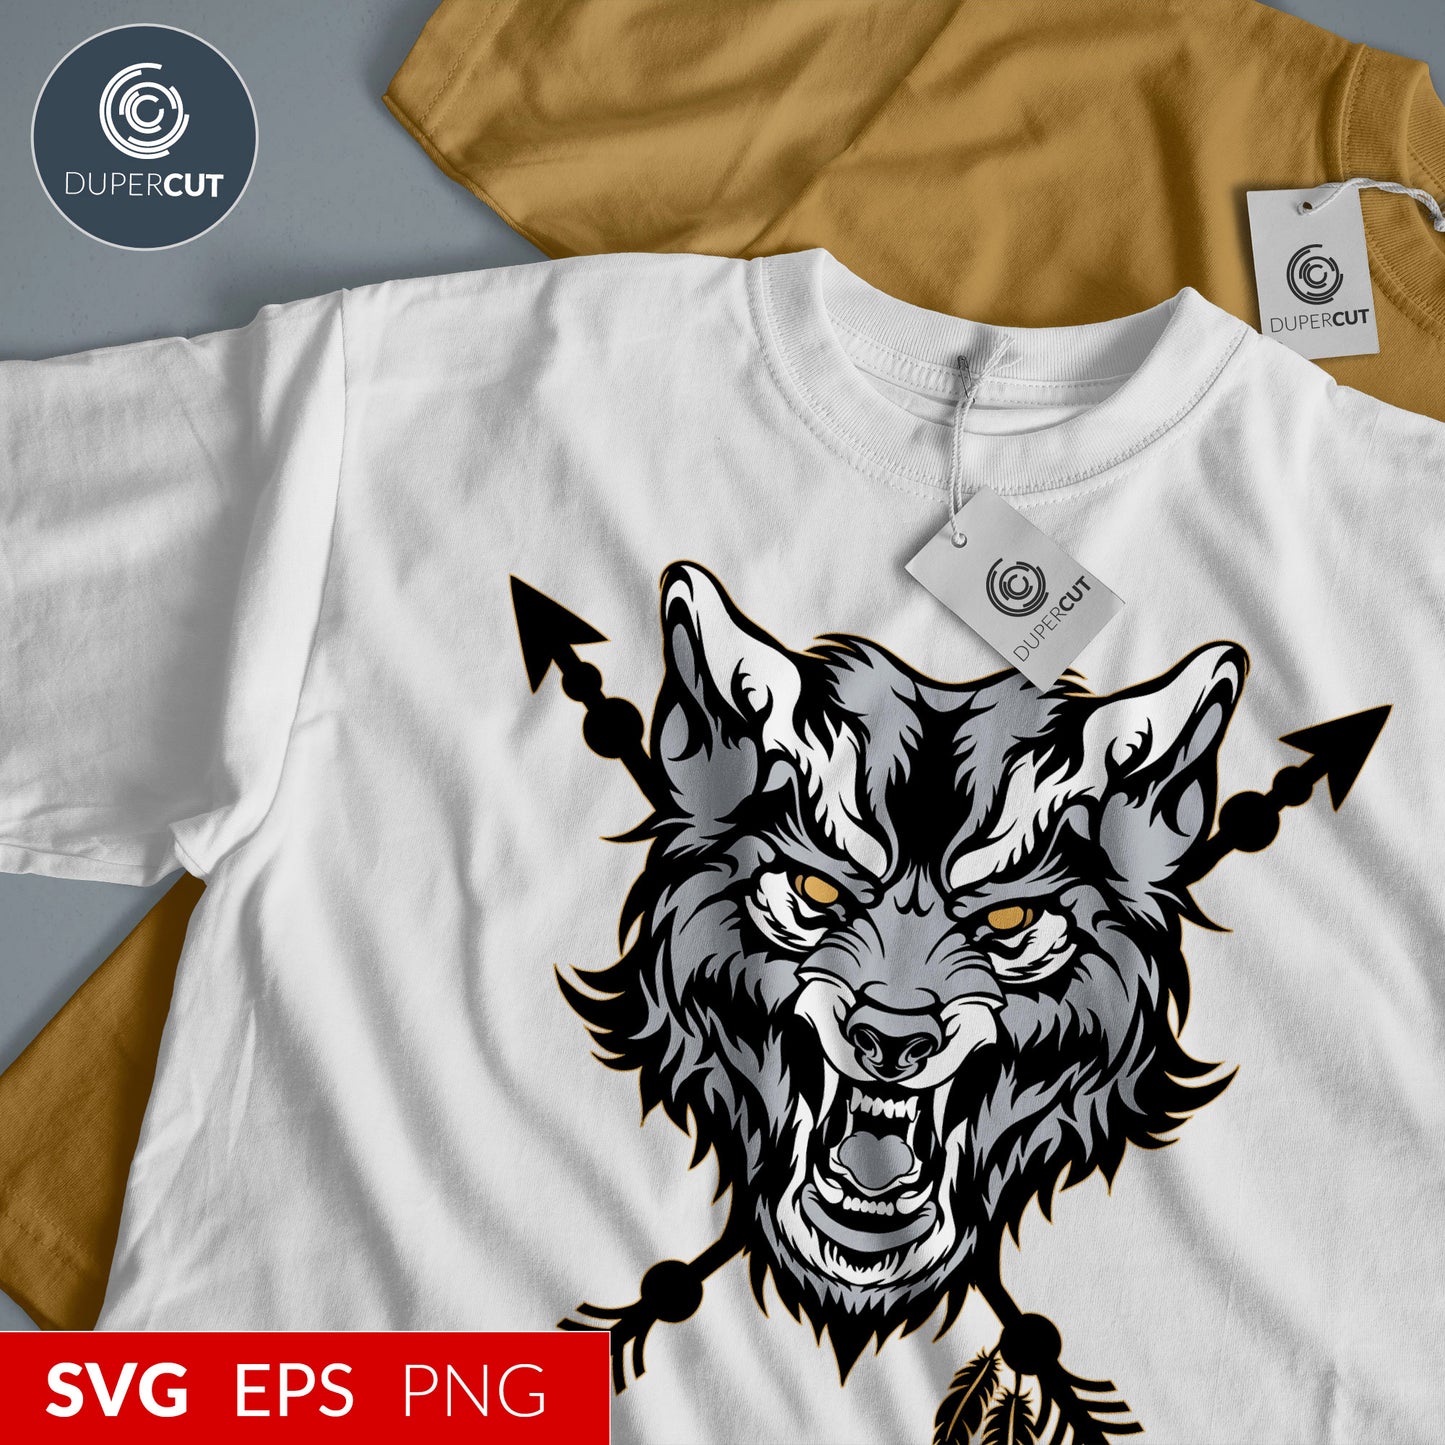 Angry Wolf - Custom apparel design, Amazon merch template - EPS, SVG, PNG files. Vector Colour illustration for print on demand, sublimation, custom t-shirts, hoodies, tumblers.